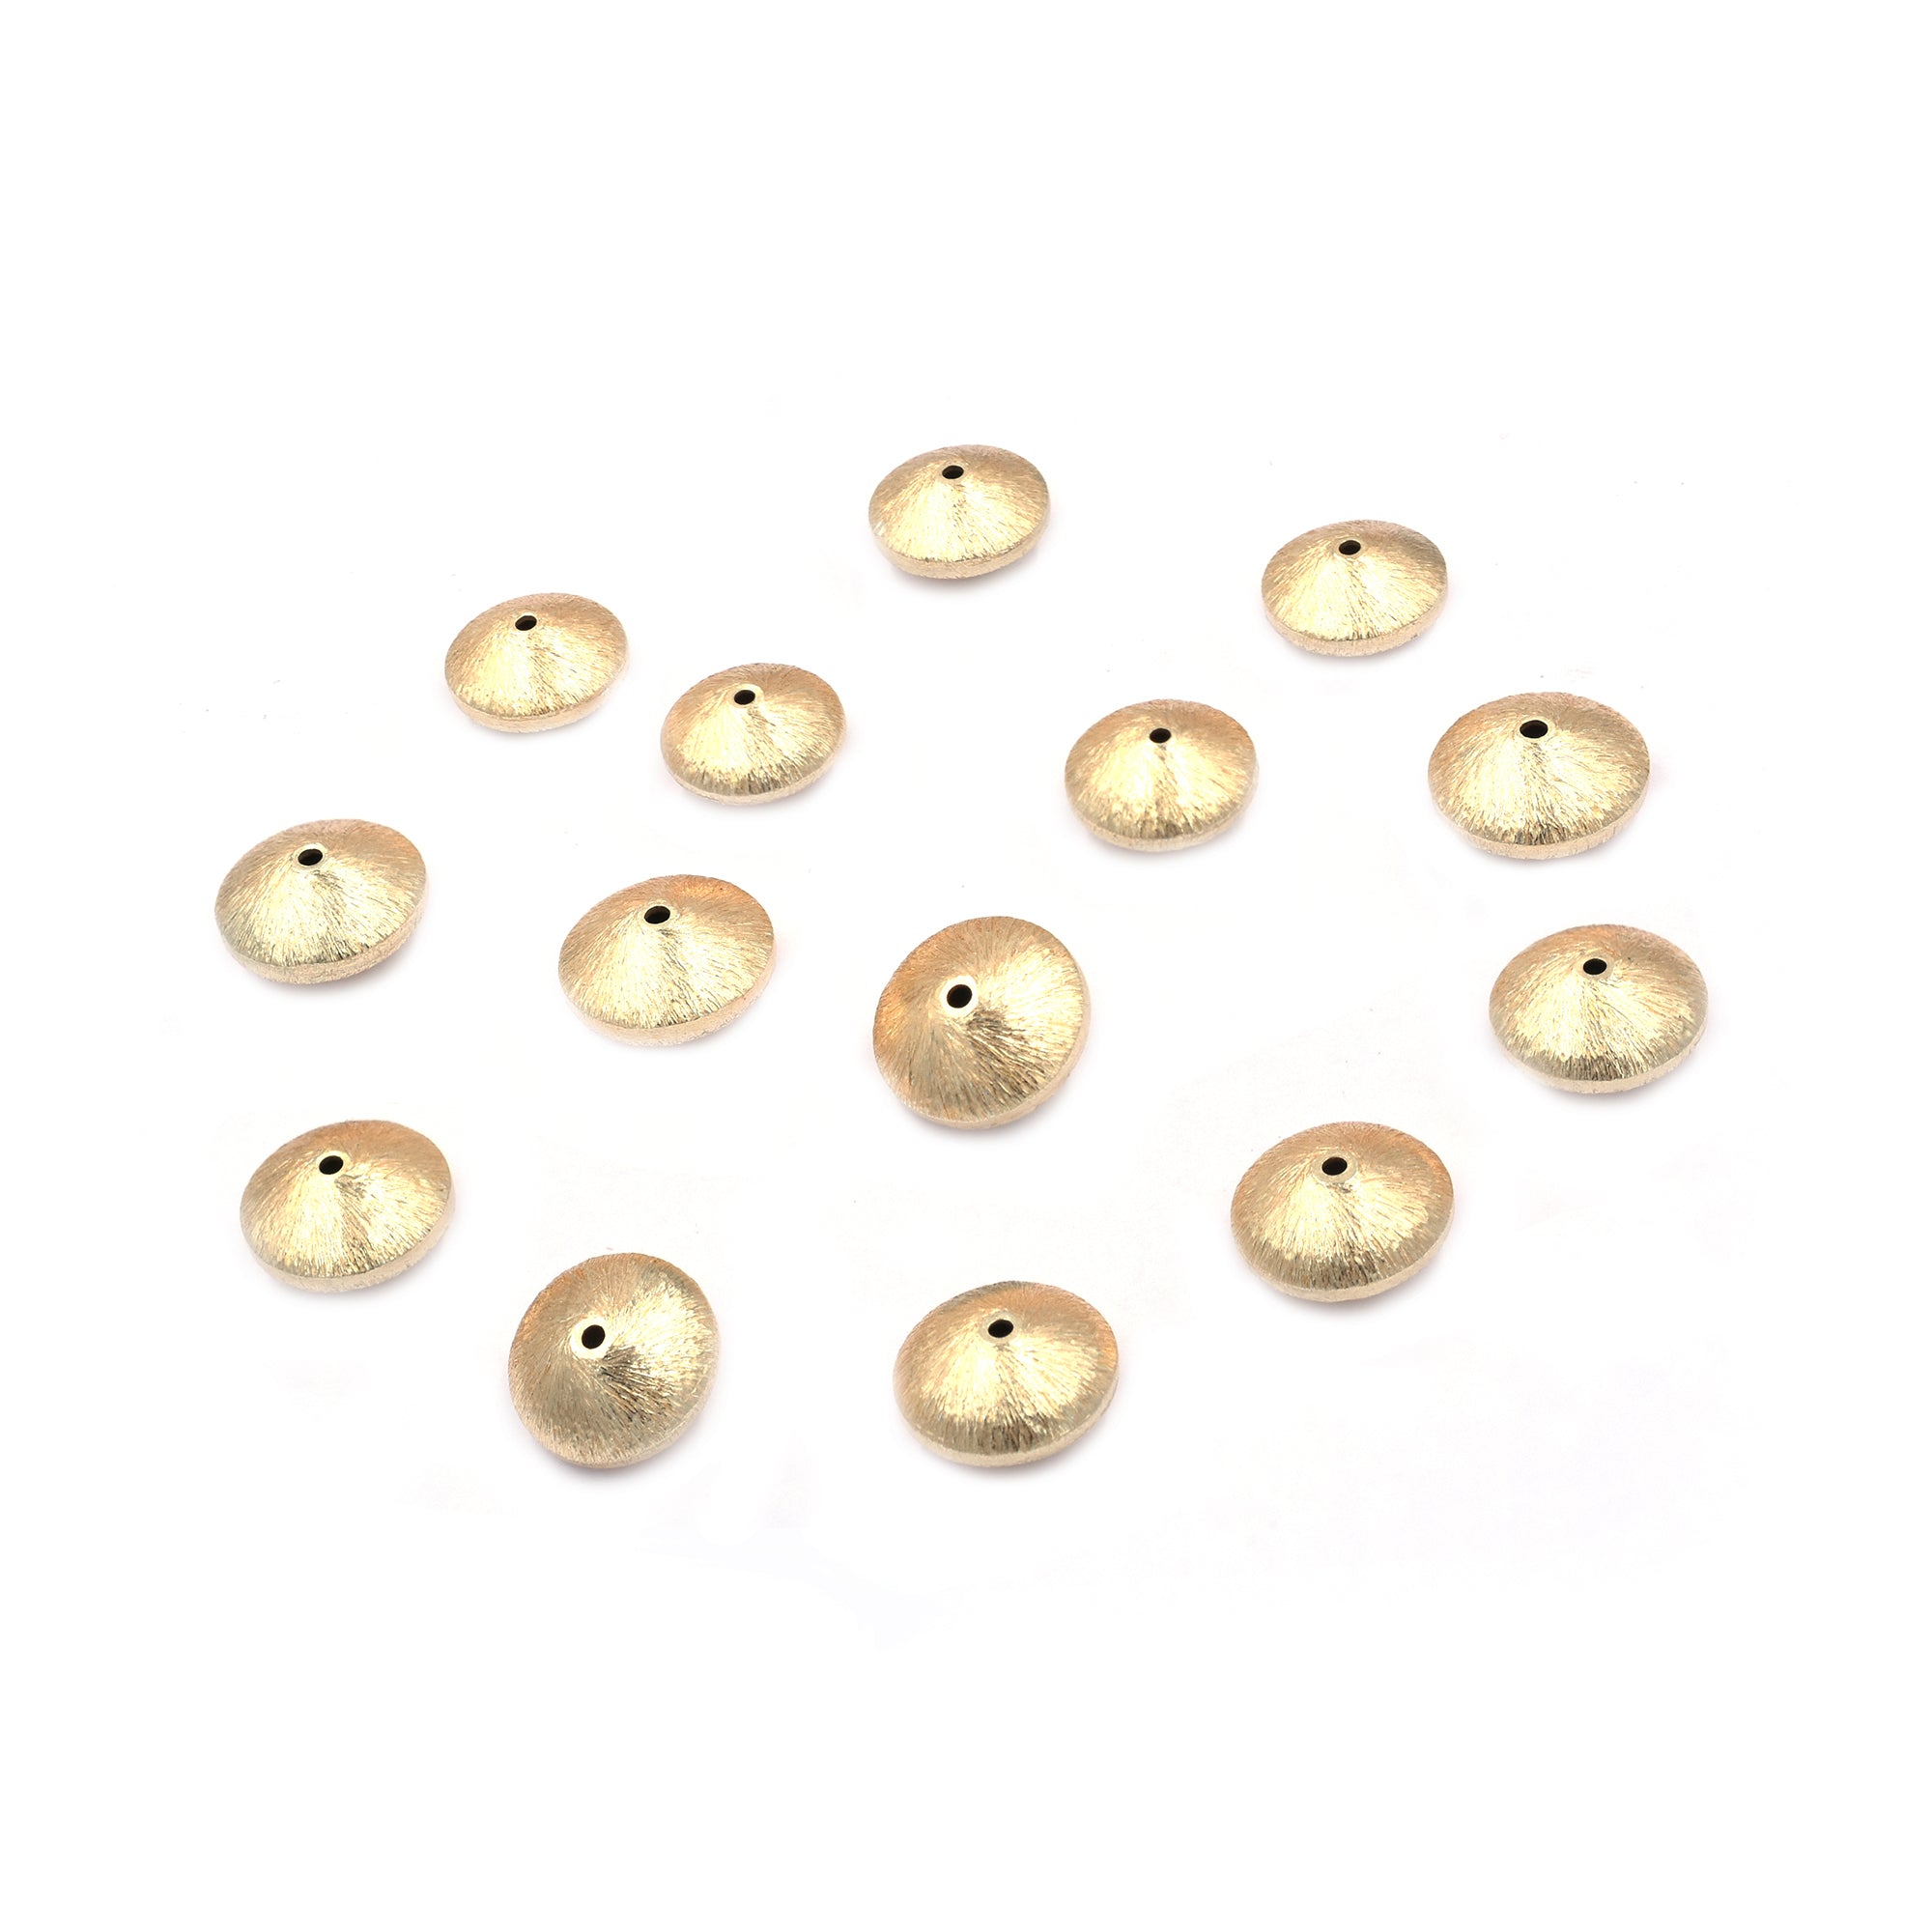 30 Pcs 12mm Bicone Brushed Matte Finish Beads Gold Plated Copper